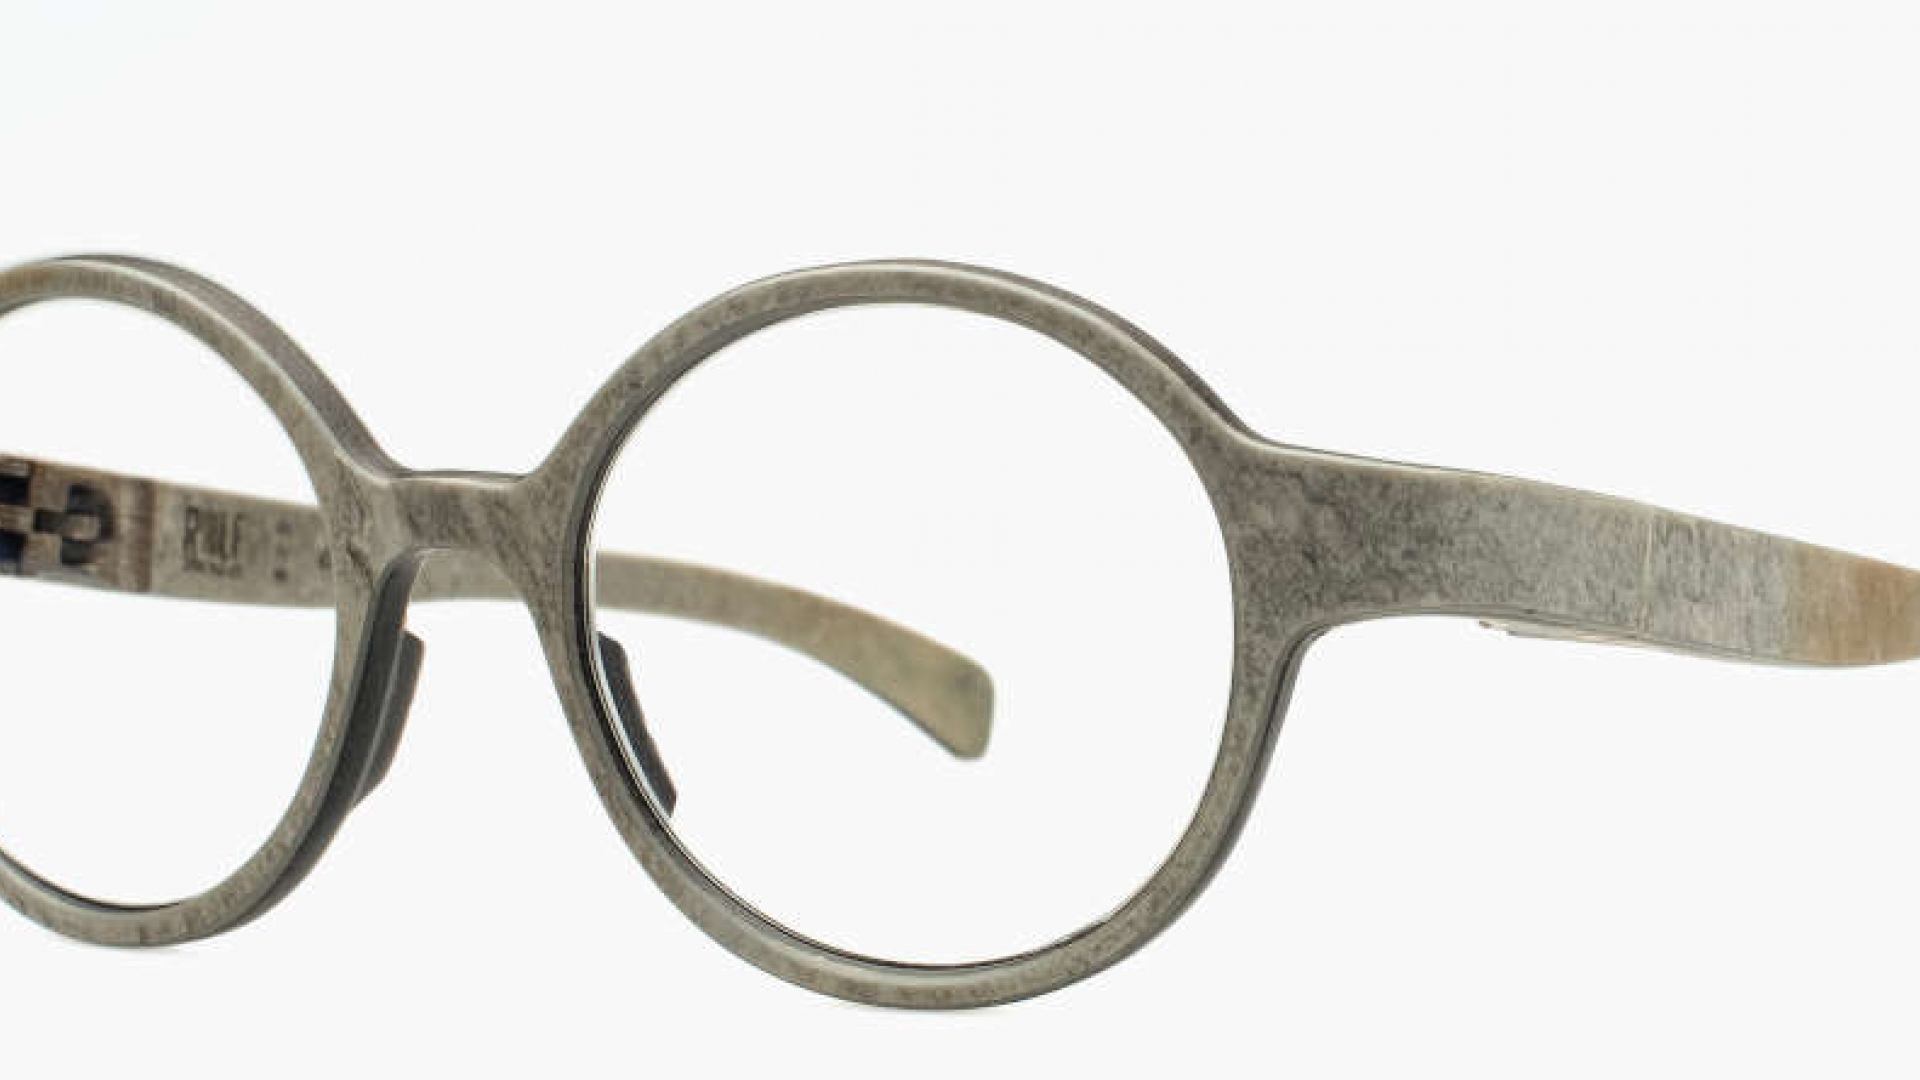 Rolf Spectacles, mod. Topolino